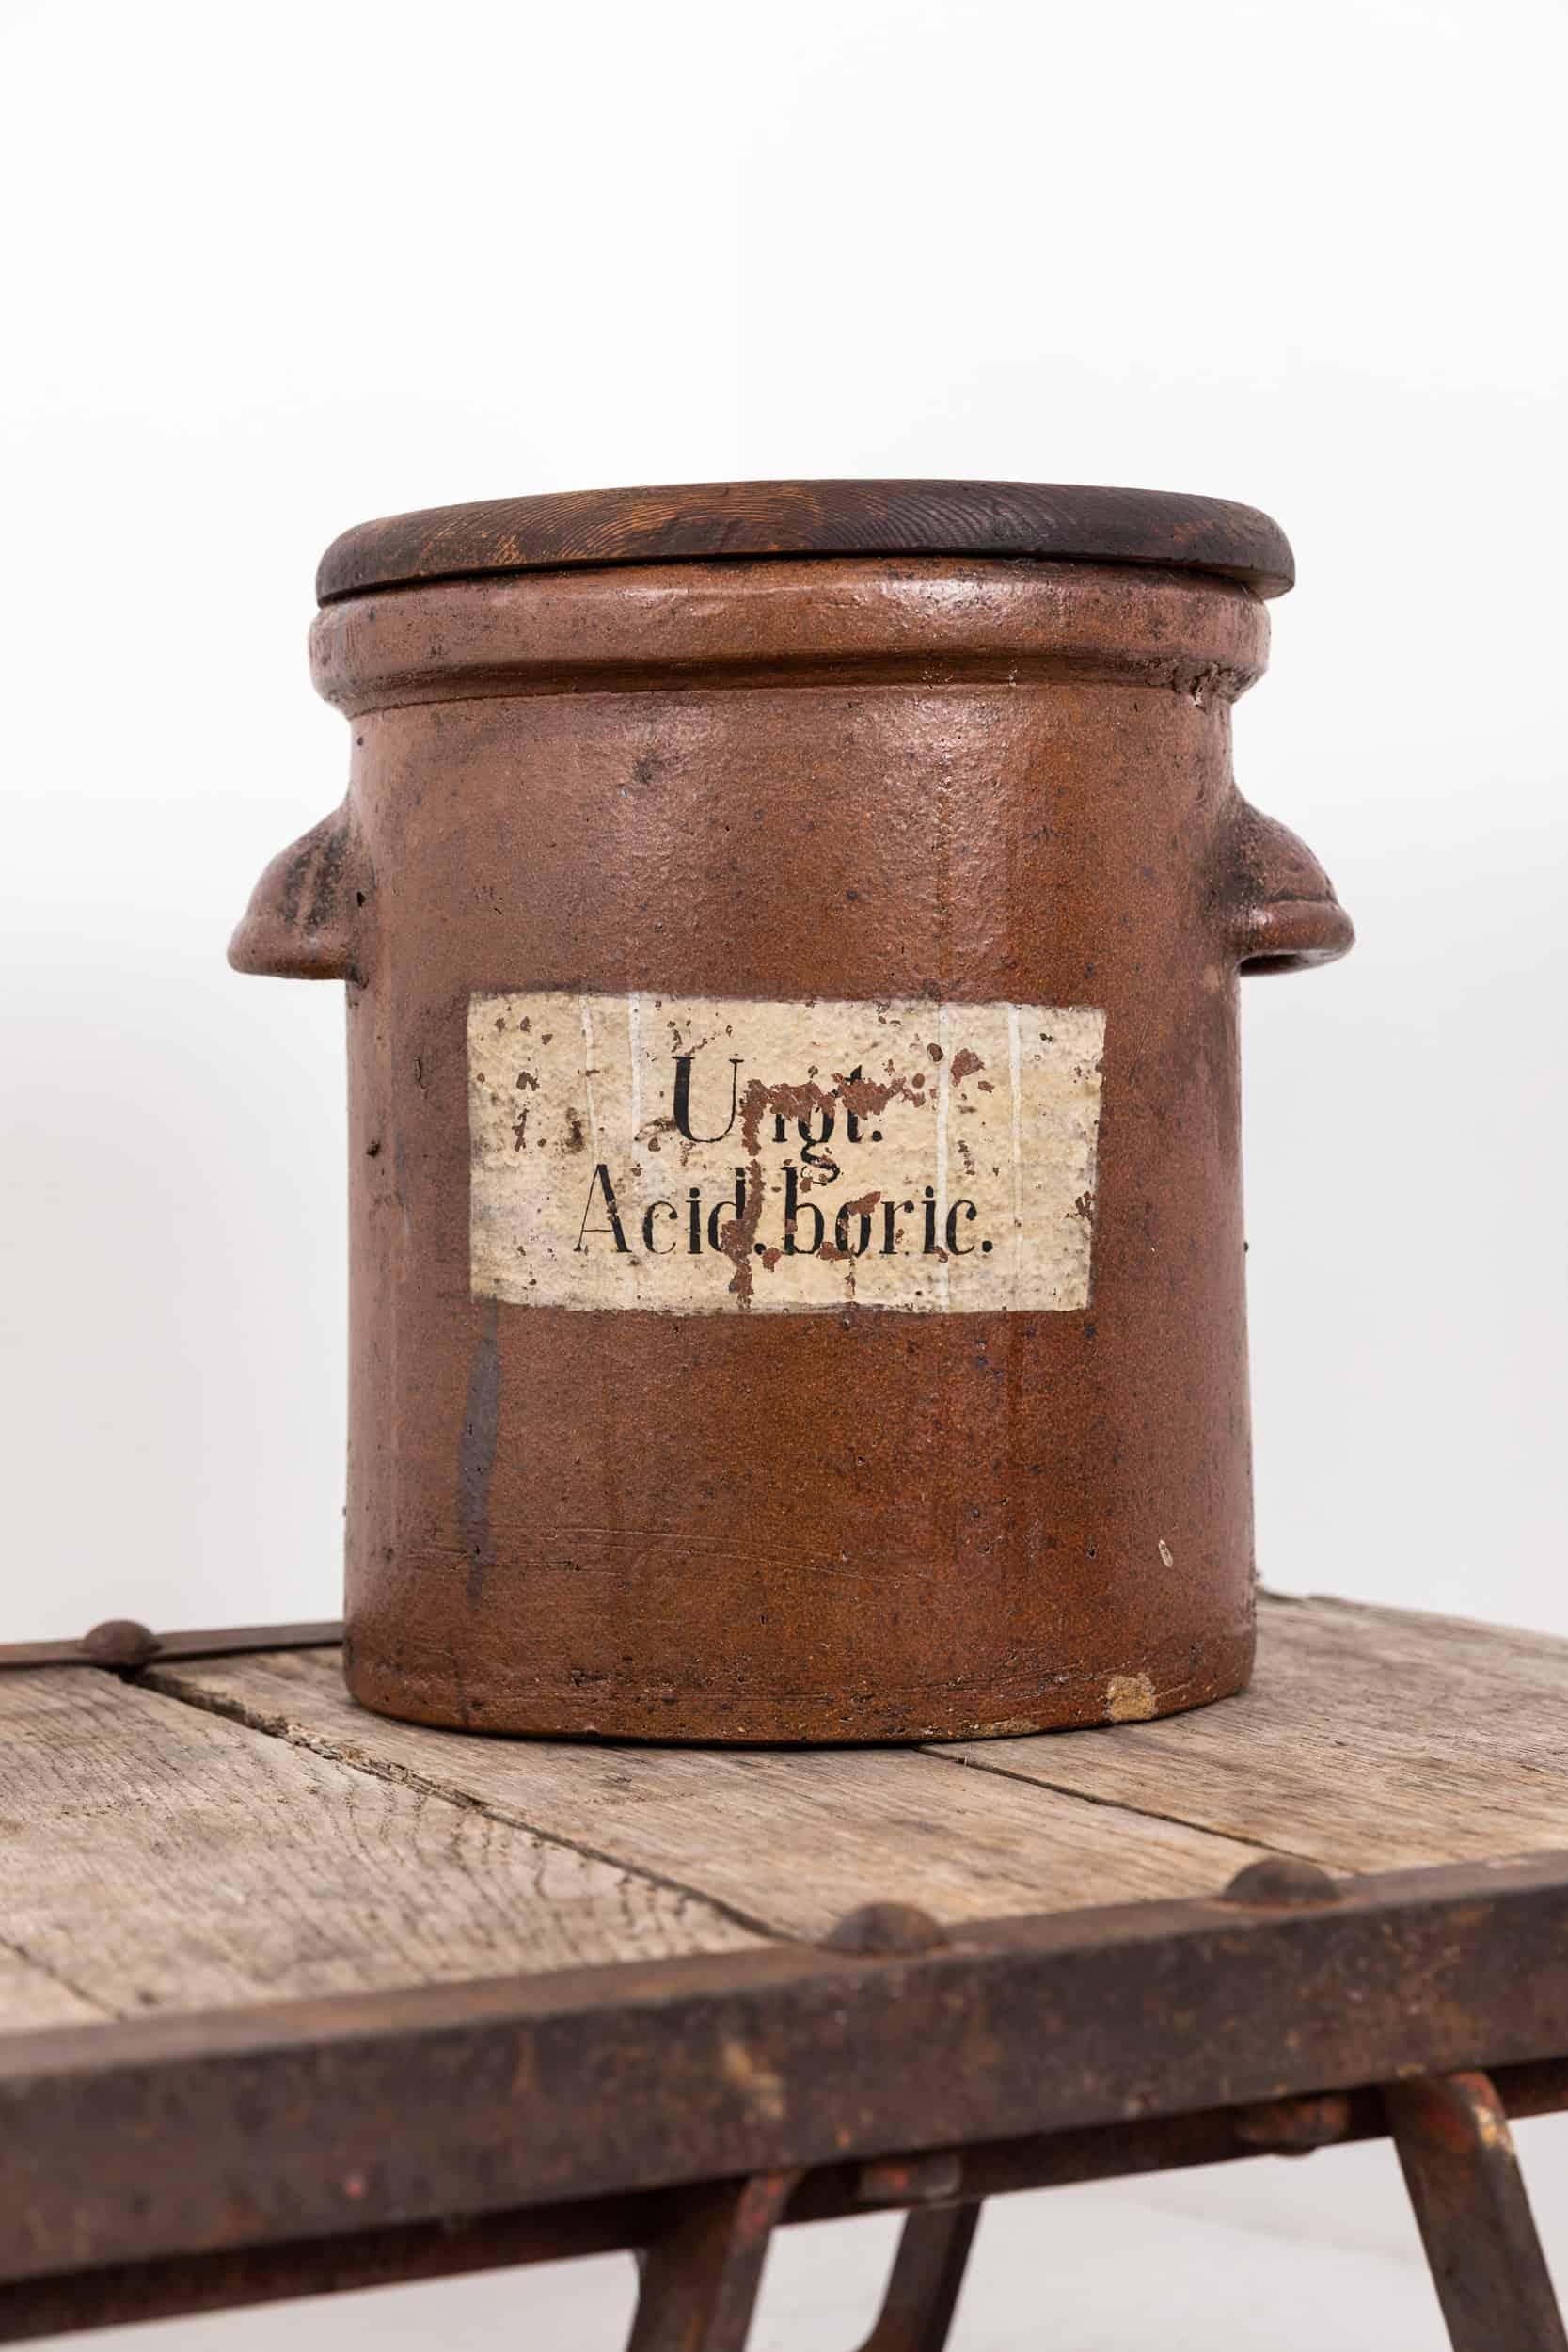 An original salt glazed clay apothecary jar. c.1900

Once containing boric acid and likely used is a pharmacy. Perfect for repurposing as a plant pot or log bin. Remnants of the hand painted label remain, with integral cupped handles either side and